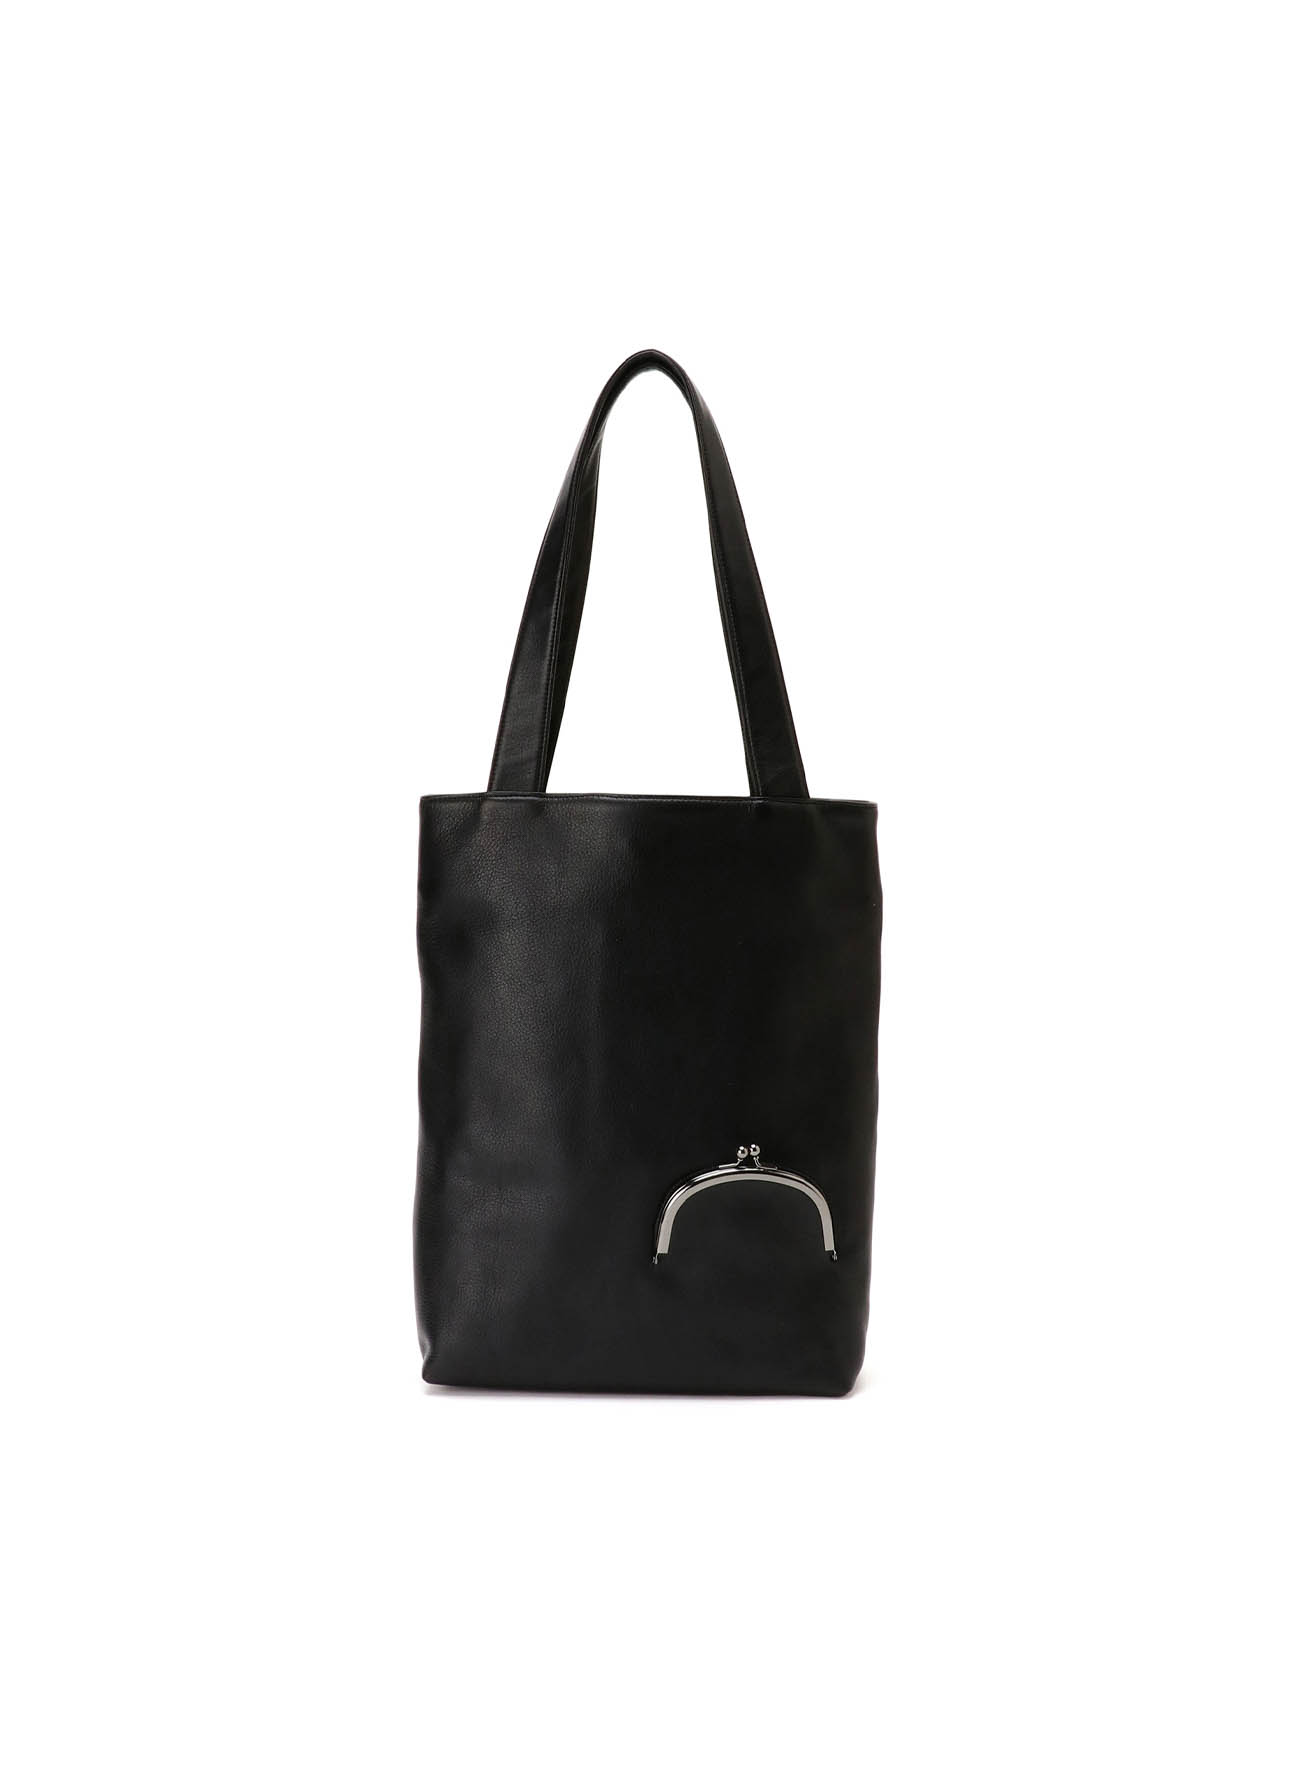 【2/2 12:00(JST) Release】Clasp tote（S)